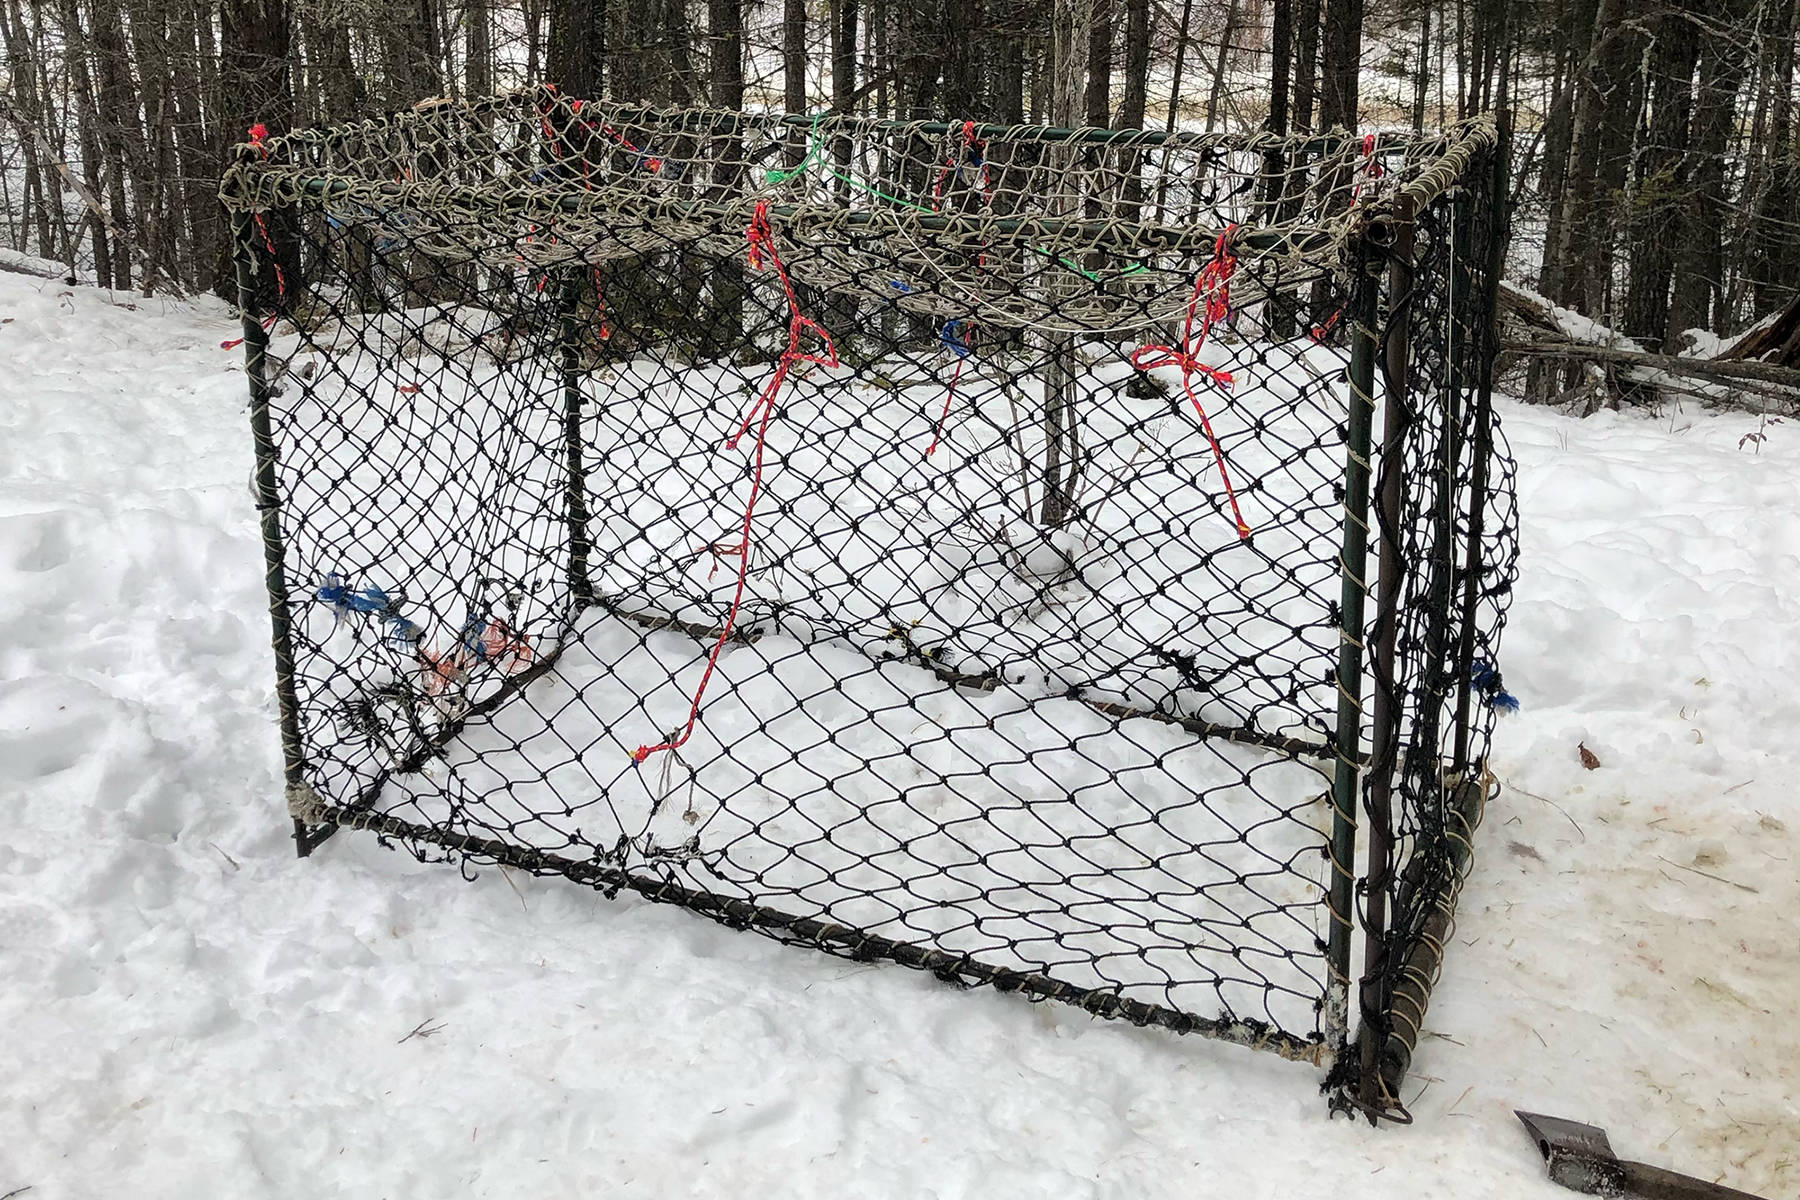 DEER CAGE                                Cages have been set up to trap mule deer in the area. The cages are checked regularly and the deer are collared and then released unharmed.                                (John Arendt/Summerland Review)